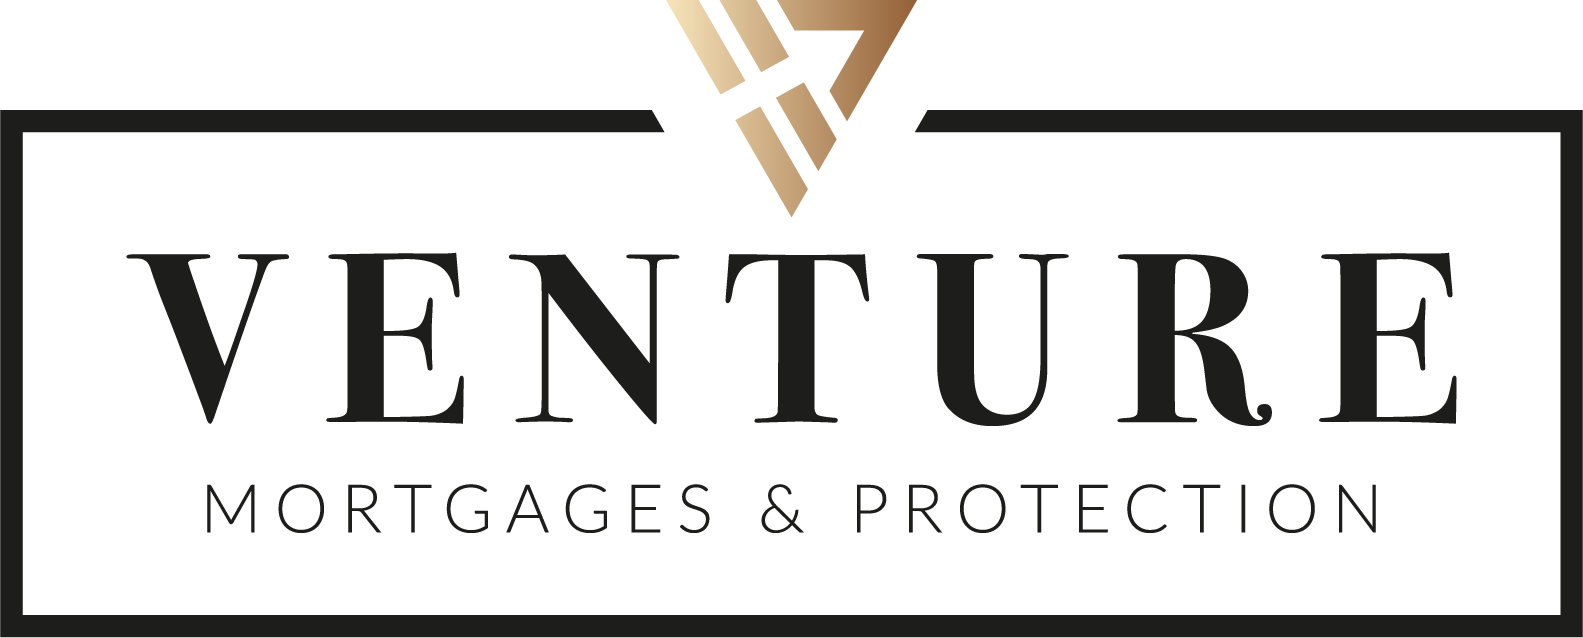 Venture Mortgages & Protection logo